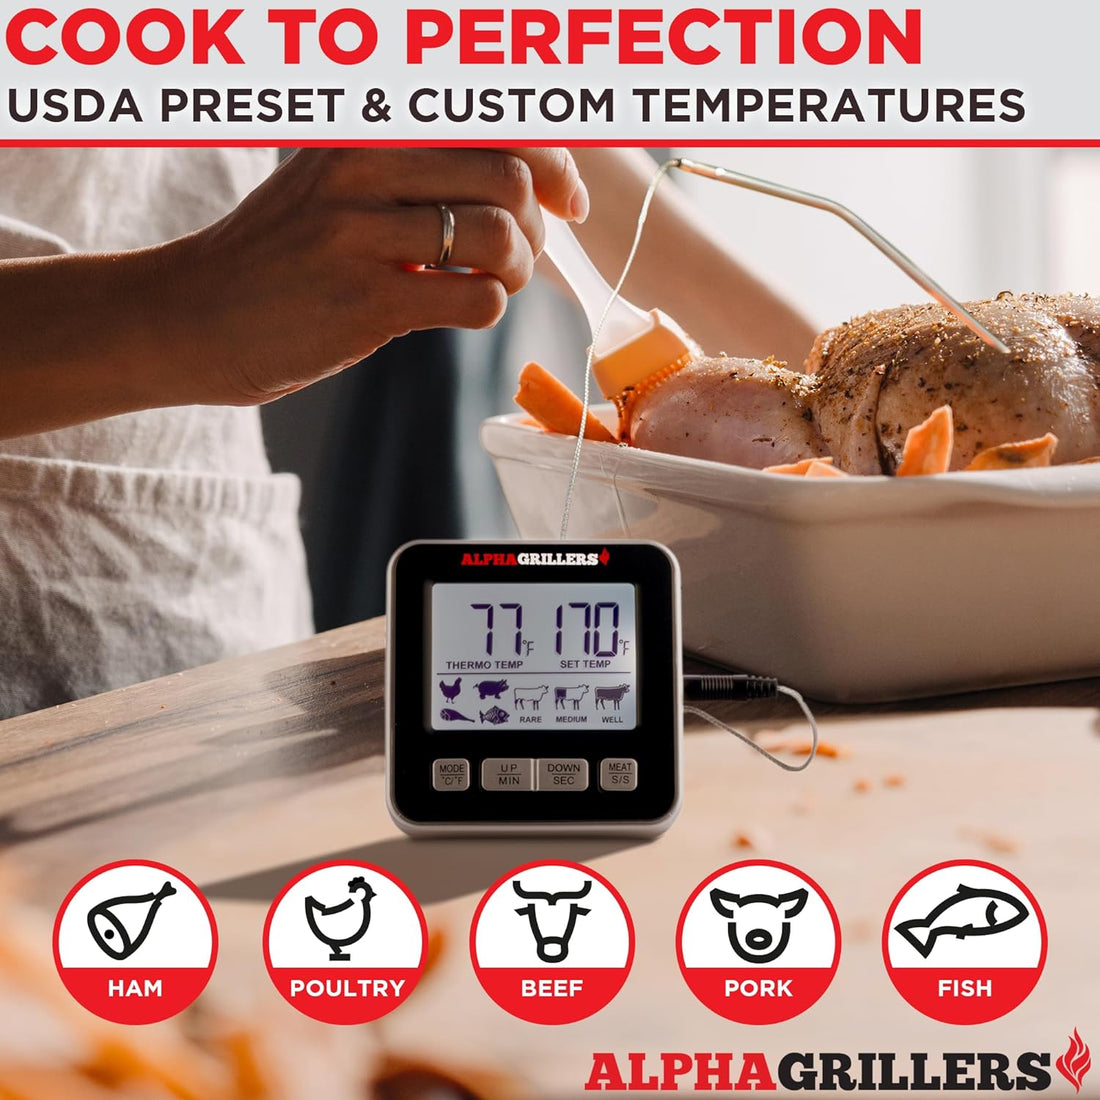 Alpha Grillers Cooking Thermometer w/ Temperature Probe, Leave in Meat Thermometer for Oven - Digital Meat Thermometer with Probe & 7 Preset Temps & Timer - Oven Thermometer for Cooking & Grilling